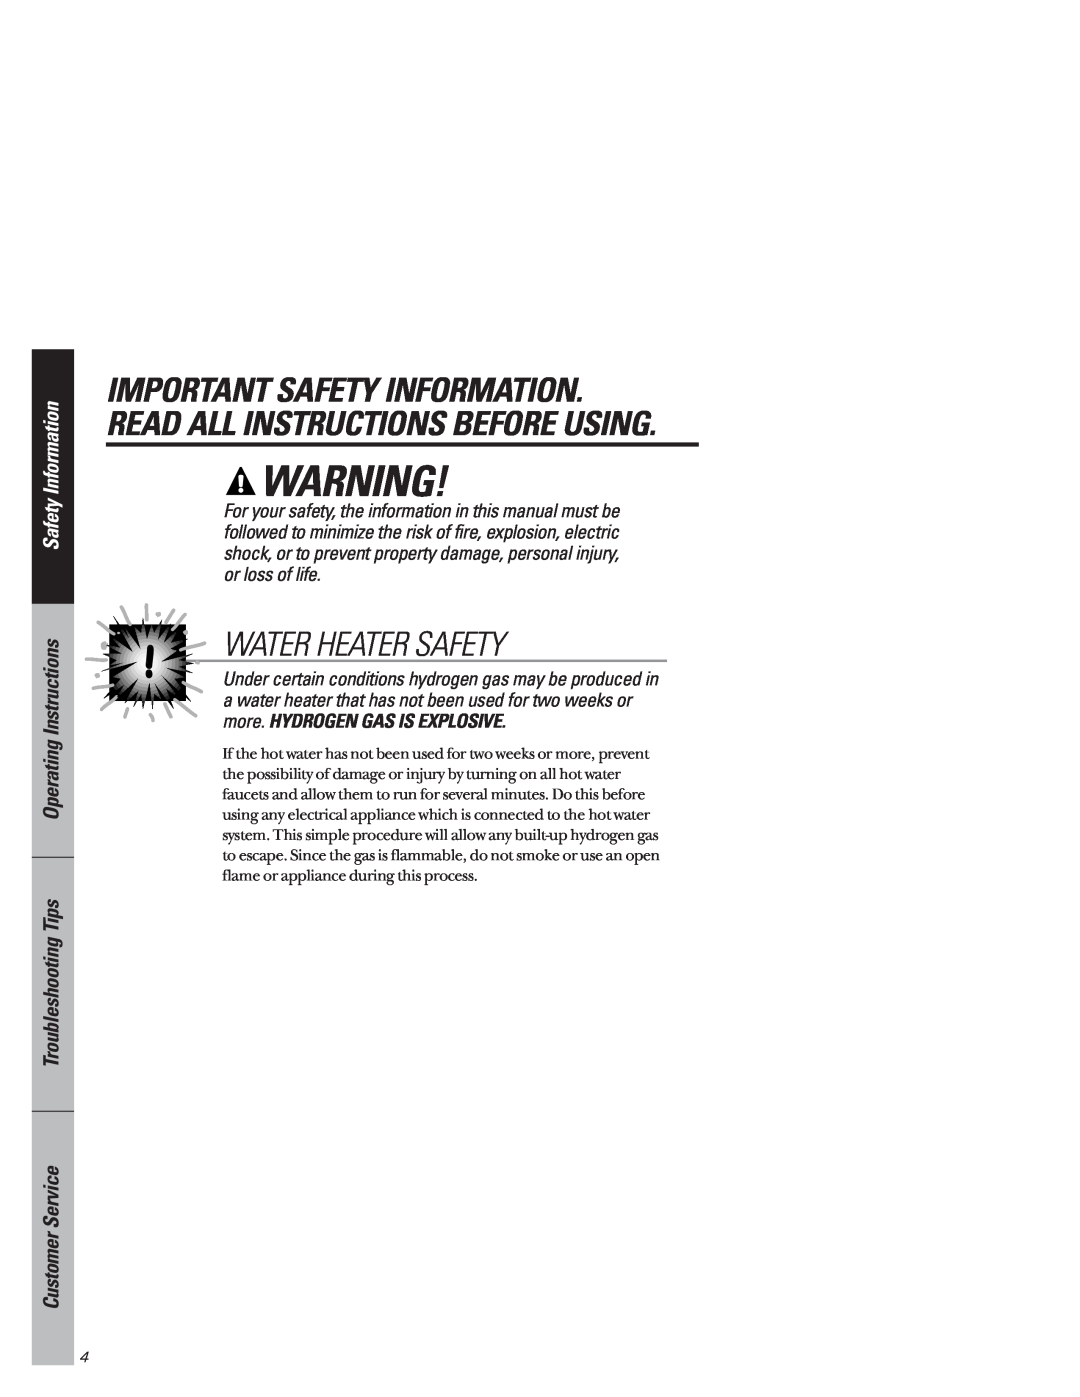 Hotpoint HDA3530 Water Heater Safety, Safety Information, Operating Instructions Troubleshooting Tips, Customer Service 